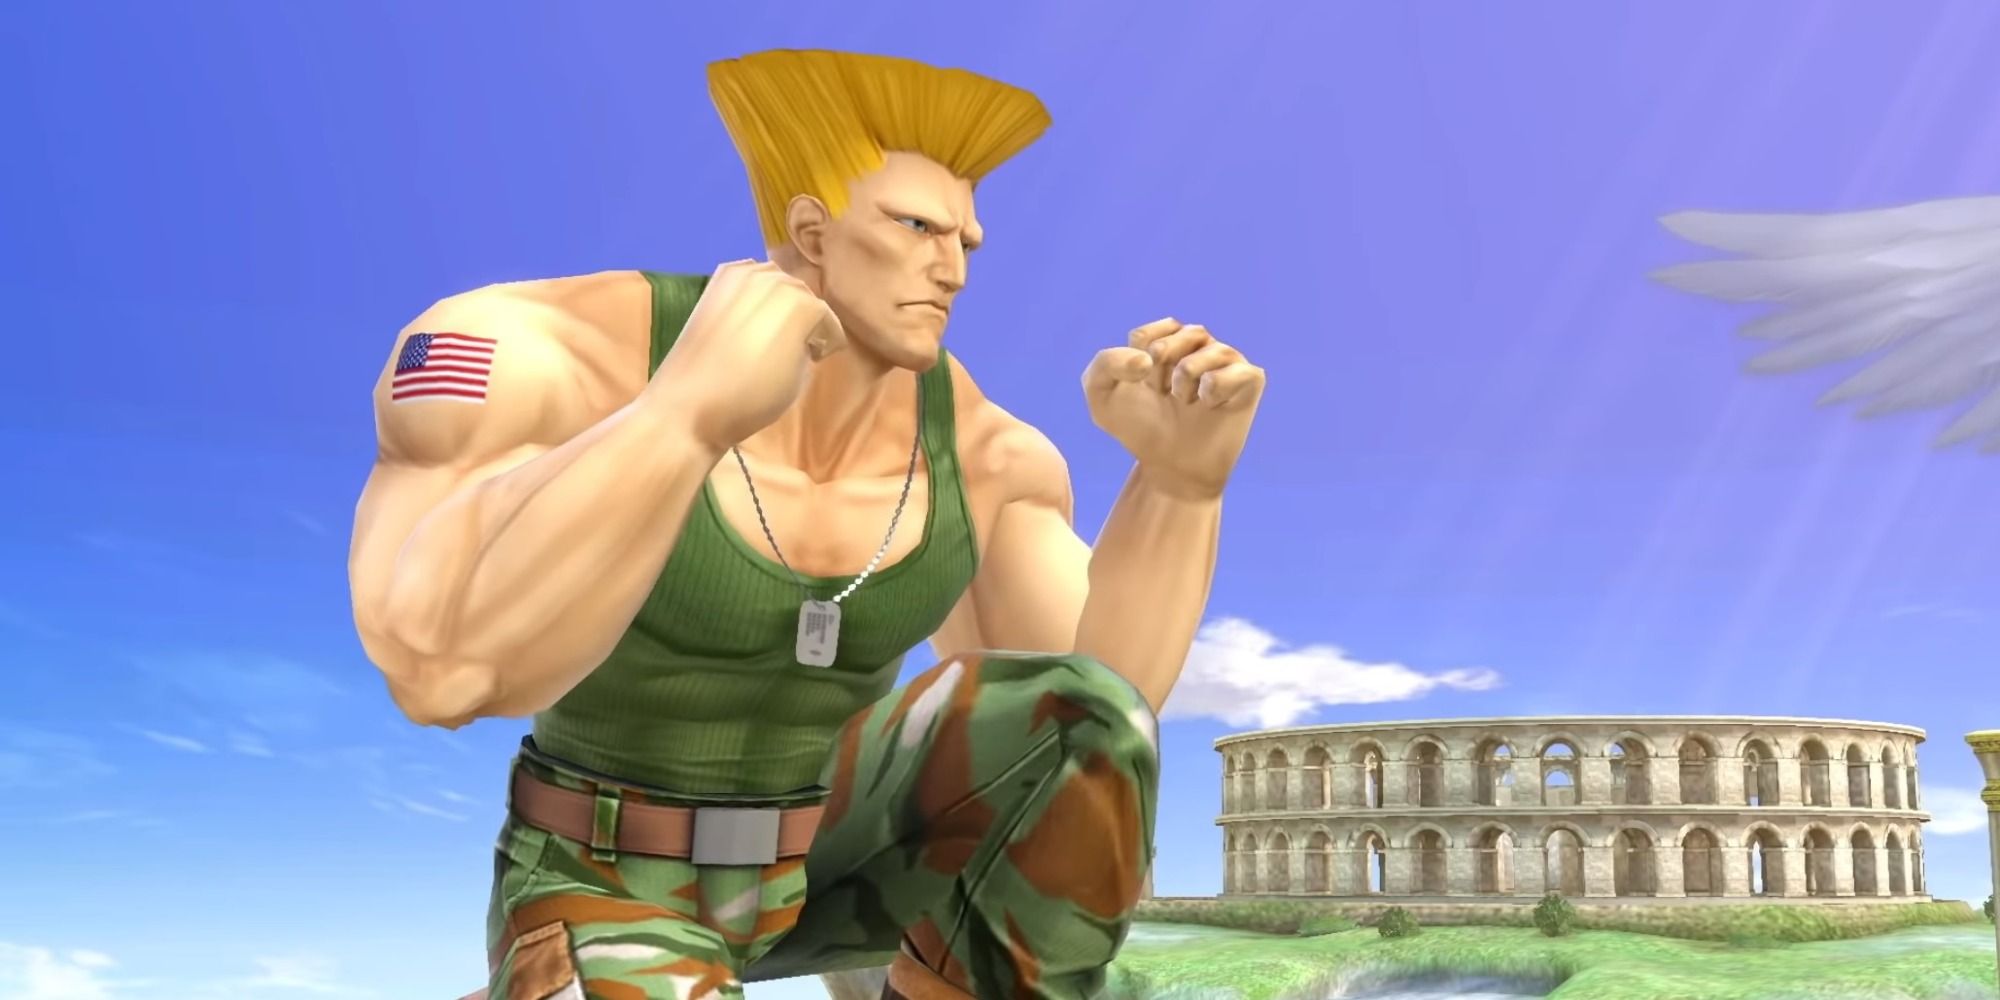 Guile posing in front of a colosseum - kneeling on one knee with his fists clenched out in front of him 